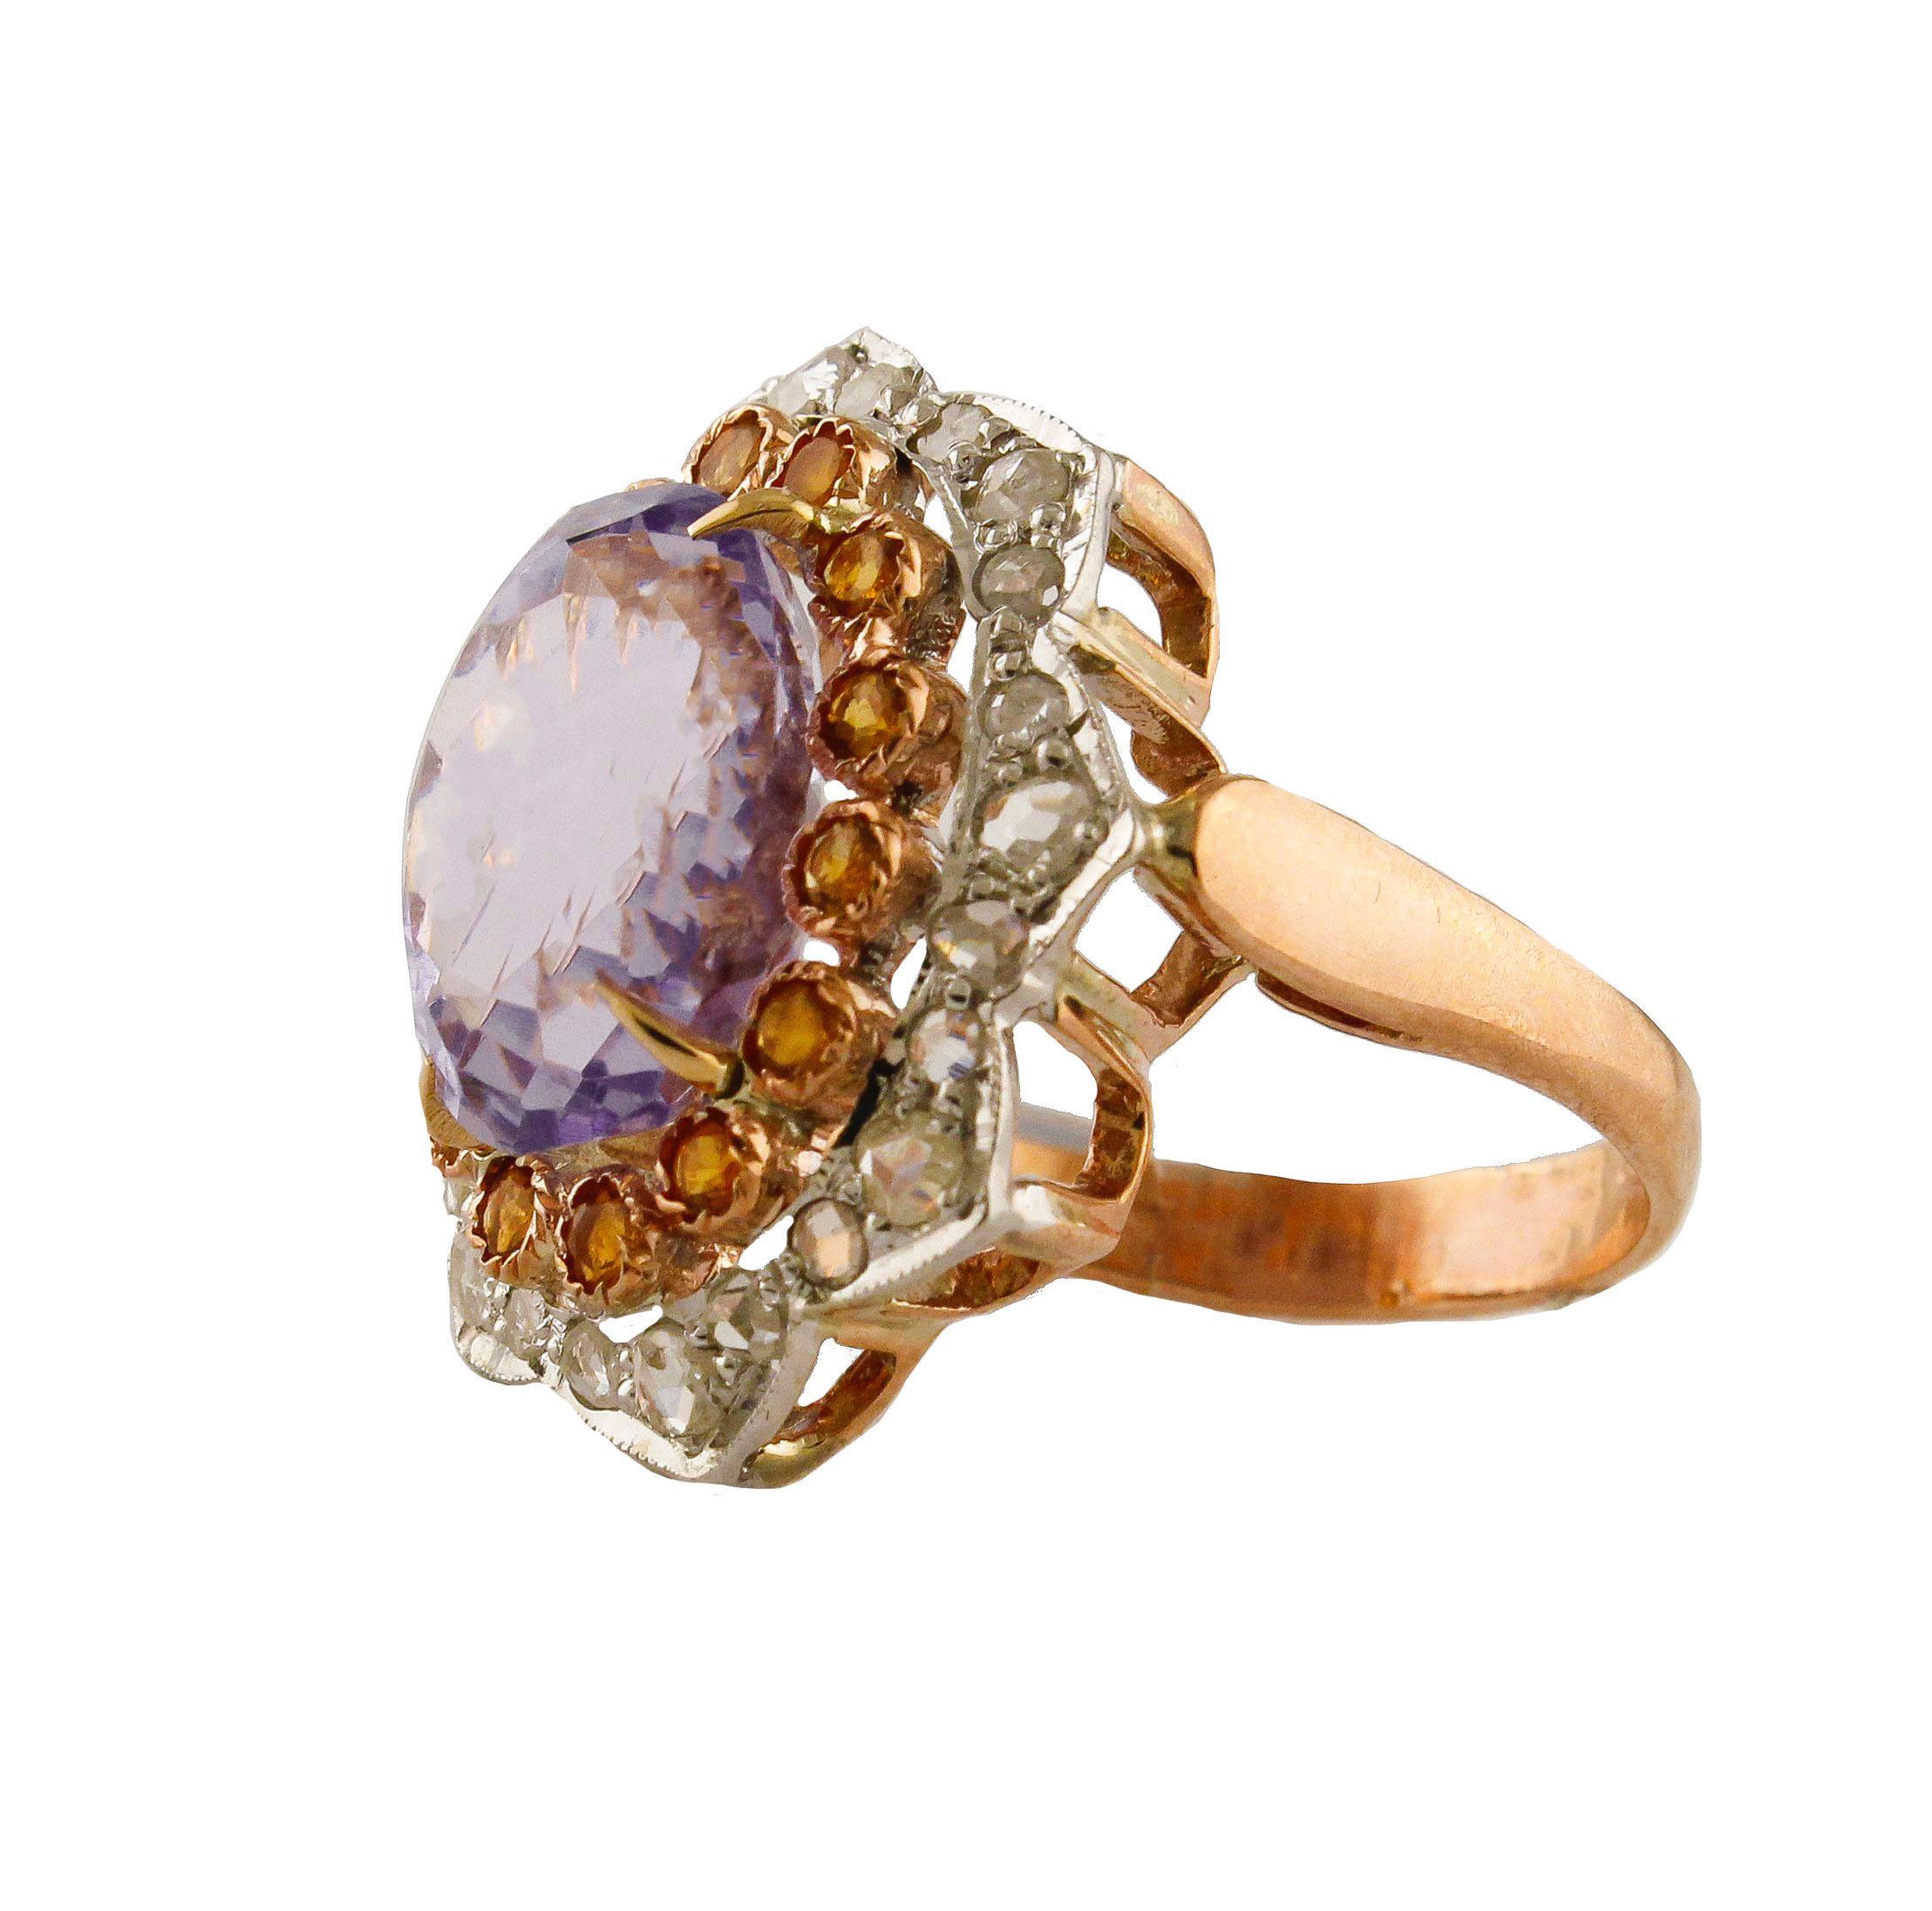 Amazing flower ring in 9 kt rose gold and silver,  with a beautiful central amethyst surrounded by yellow topazes and diamonds 
Amethyst Topaz ct 8.09   / amethyst 1.9 cm X 1 cm
Diamonds ct 0.77
Italian size 16.5
French size 56.5
Usa size 